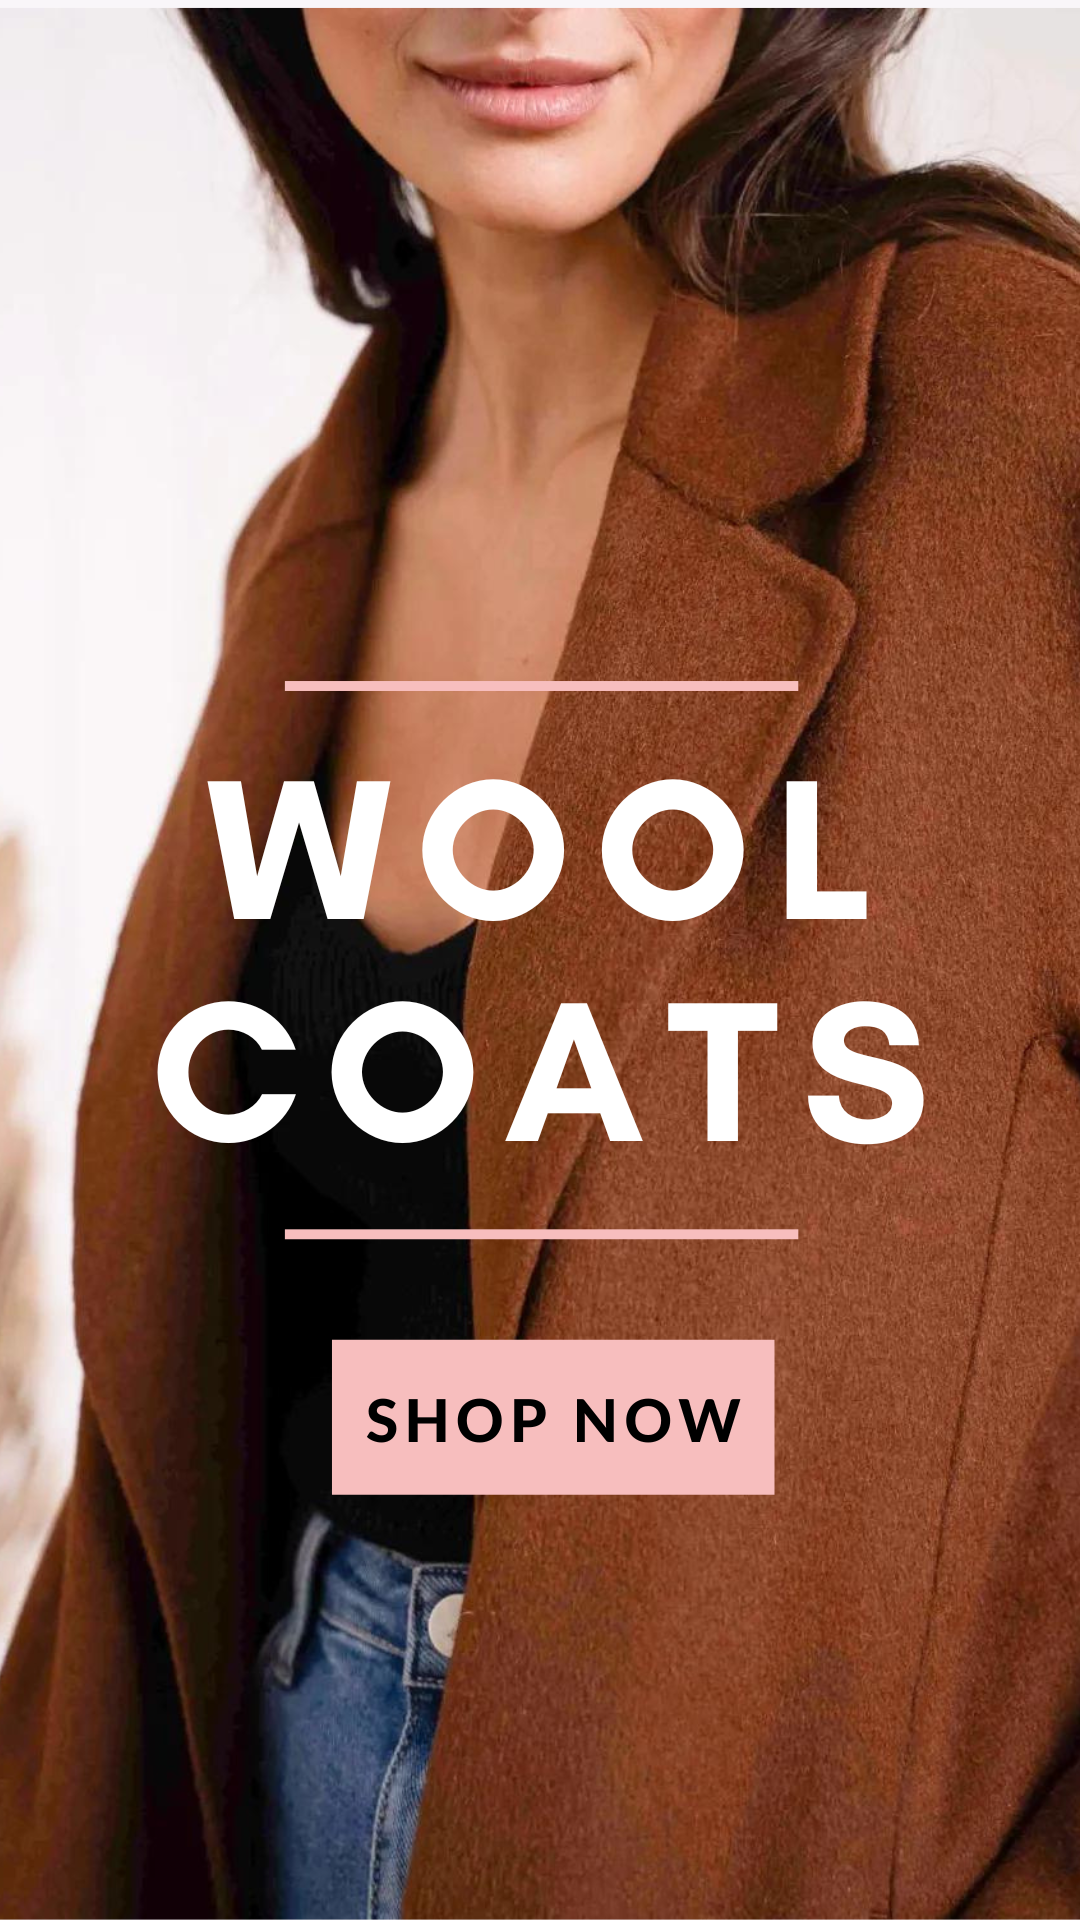 The French 95 - Women's Cool Coat - Swiss Fashion Brand